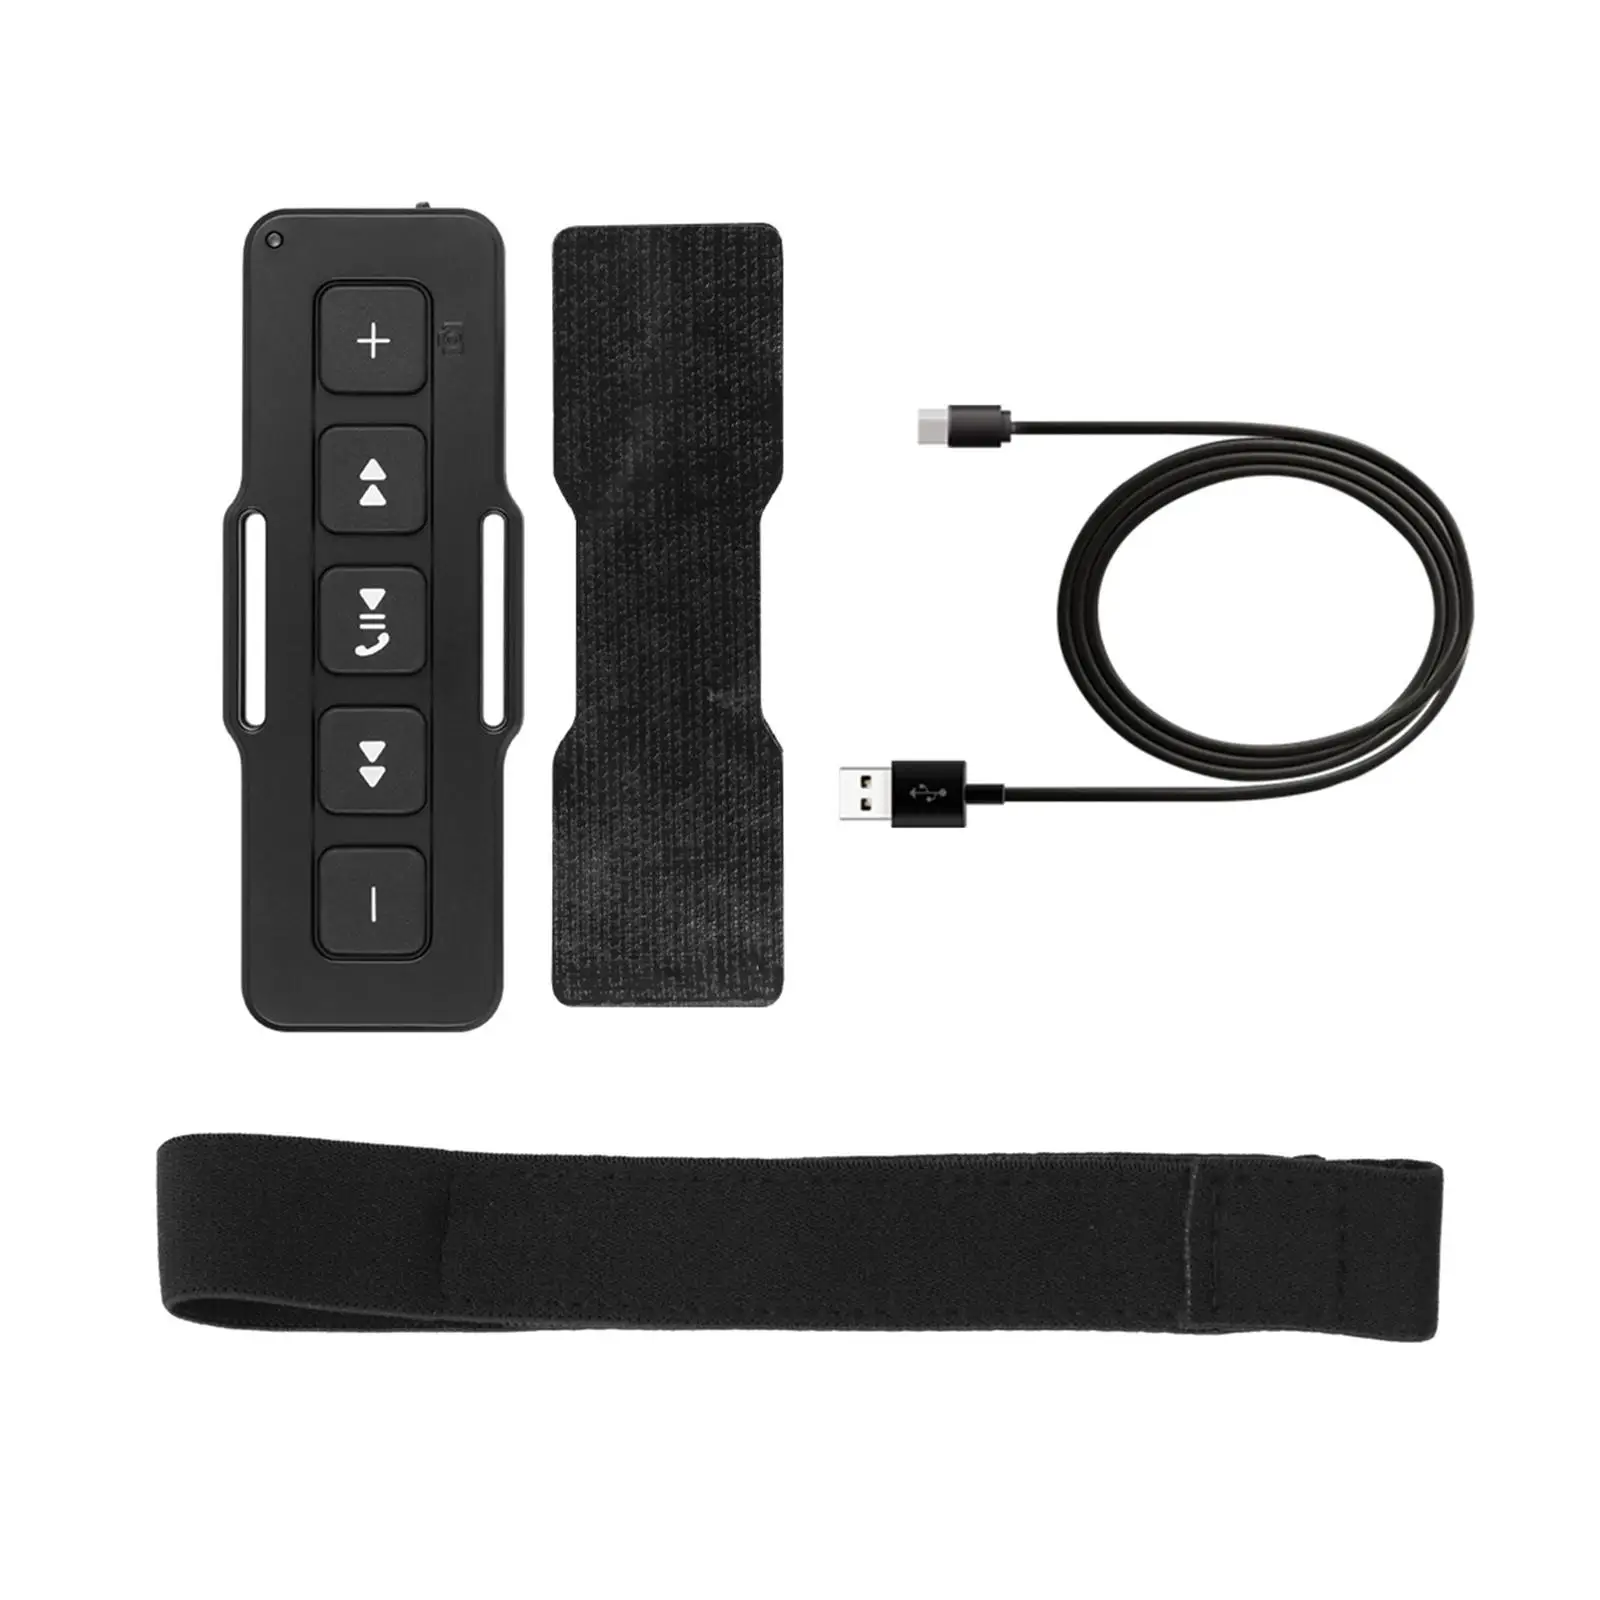 Car Remote Controller 5 Button IPX4 Portable Durable Portable Music Control Bike Handlebar Media Control for Bicycle Skiing